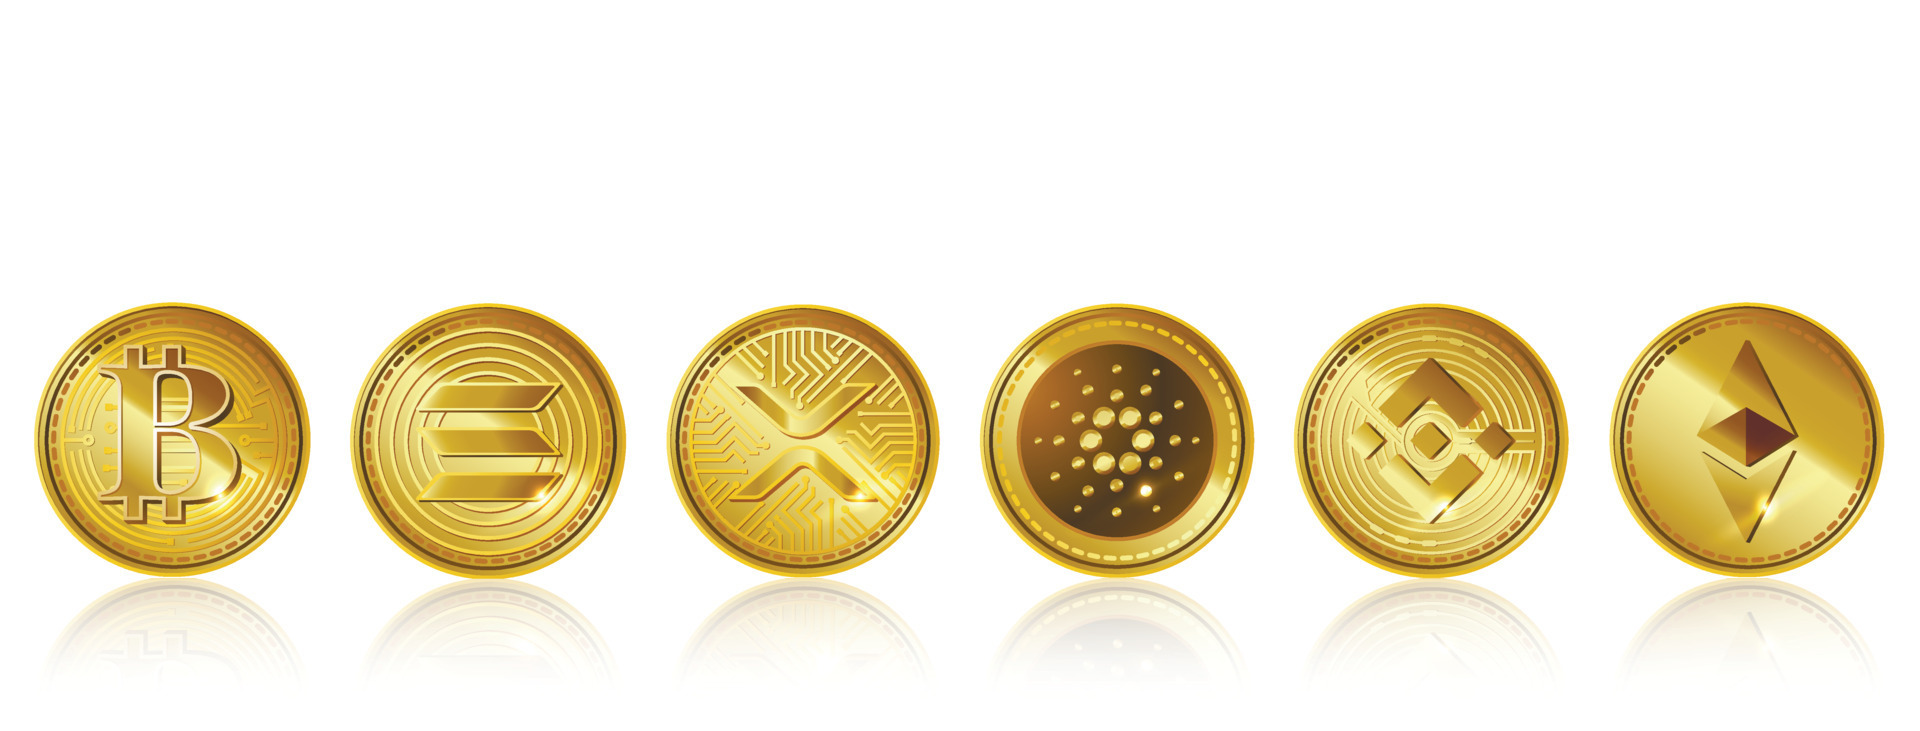 Buy Gold Coins Online - 24K () Gold Coins in India | MMTC-PAMP